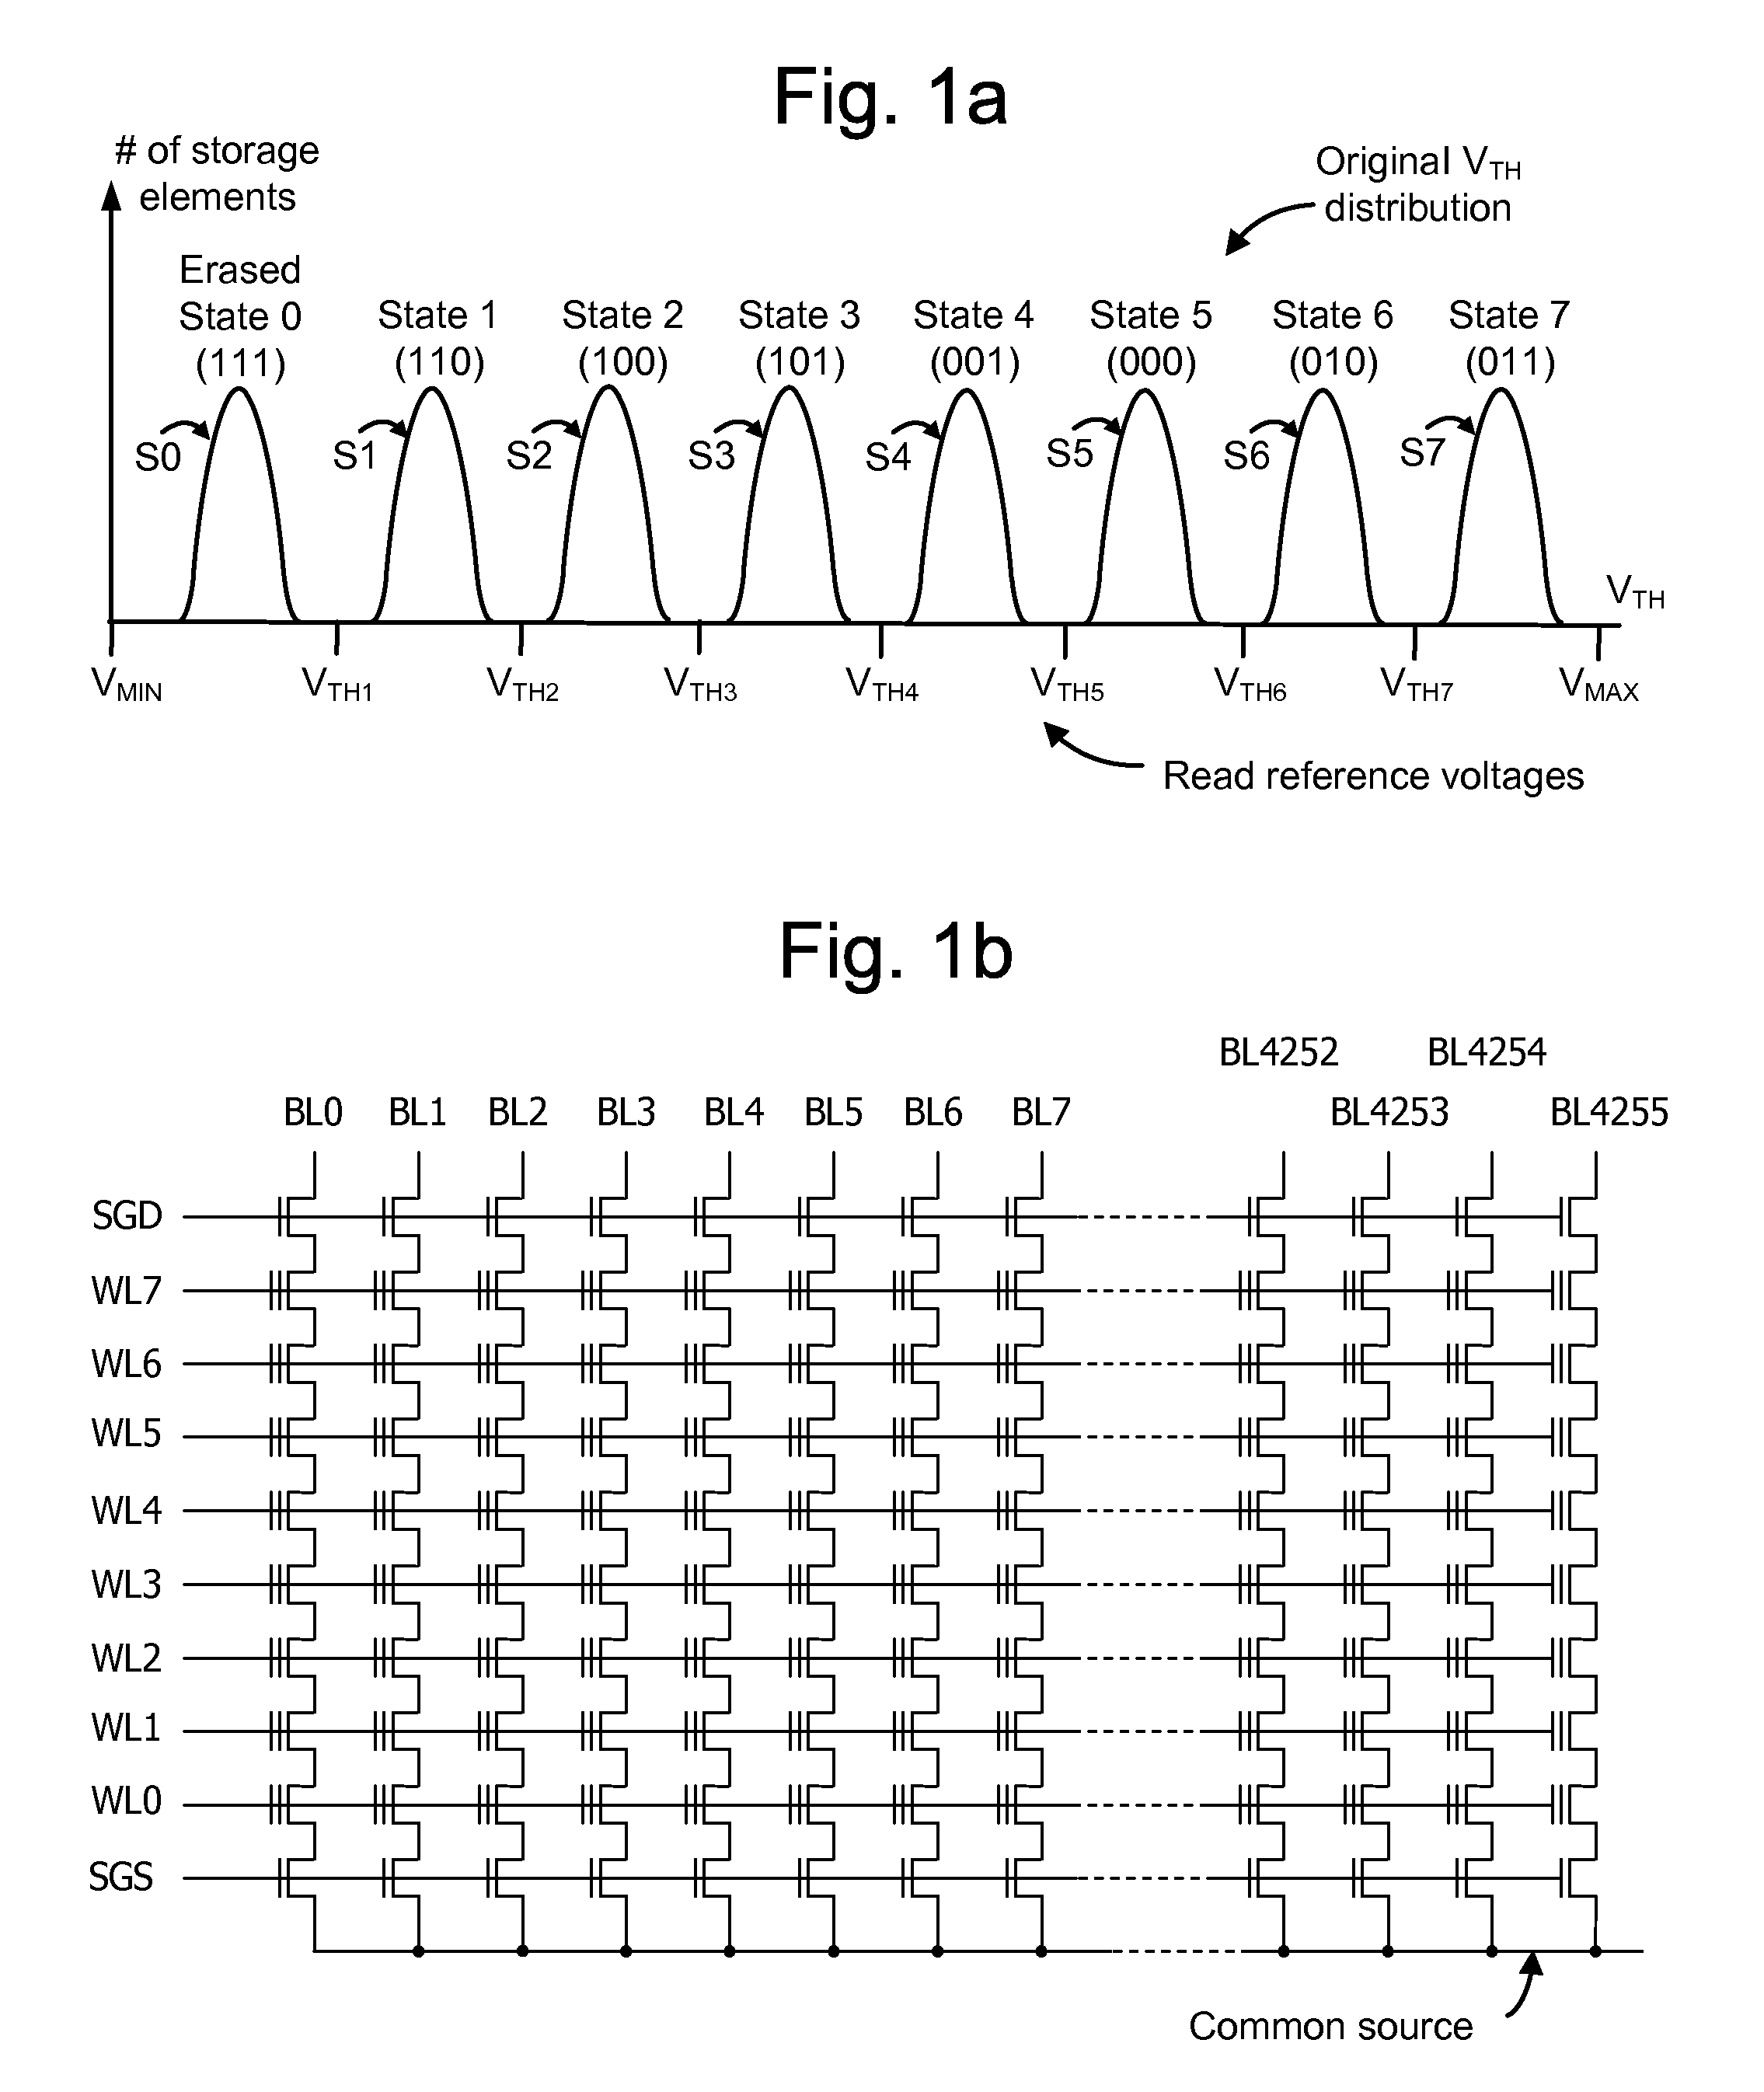 Method for page- and block based scrambling in non-volatile memory